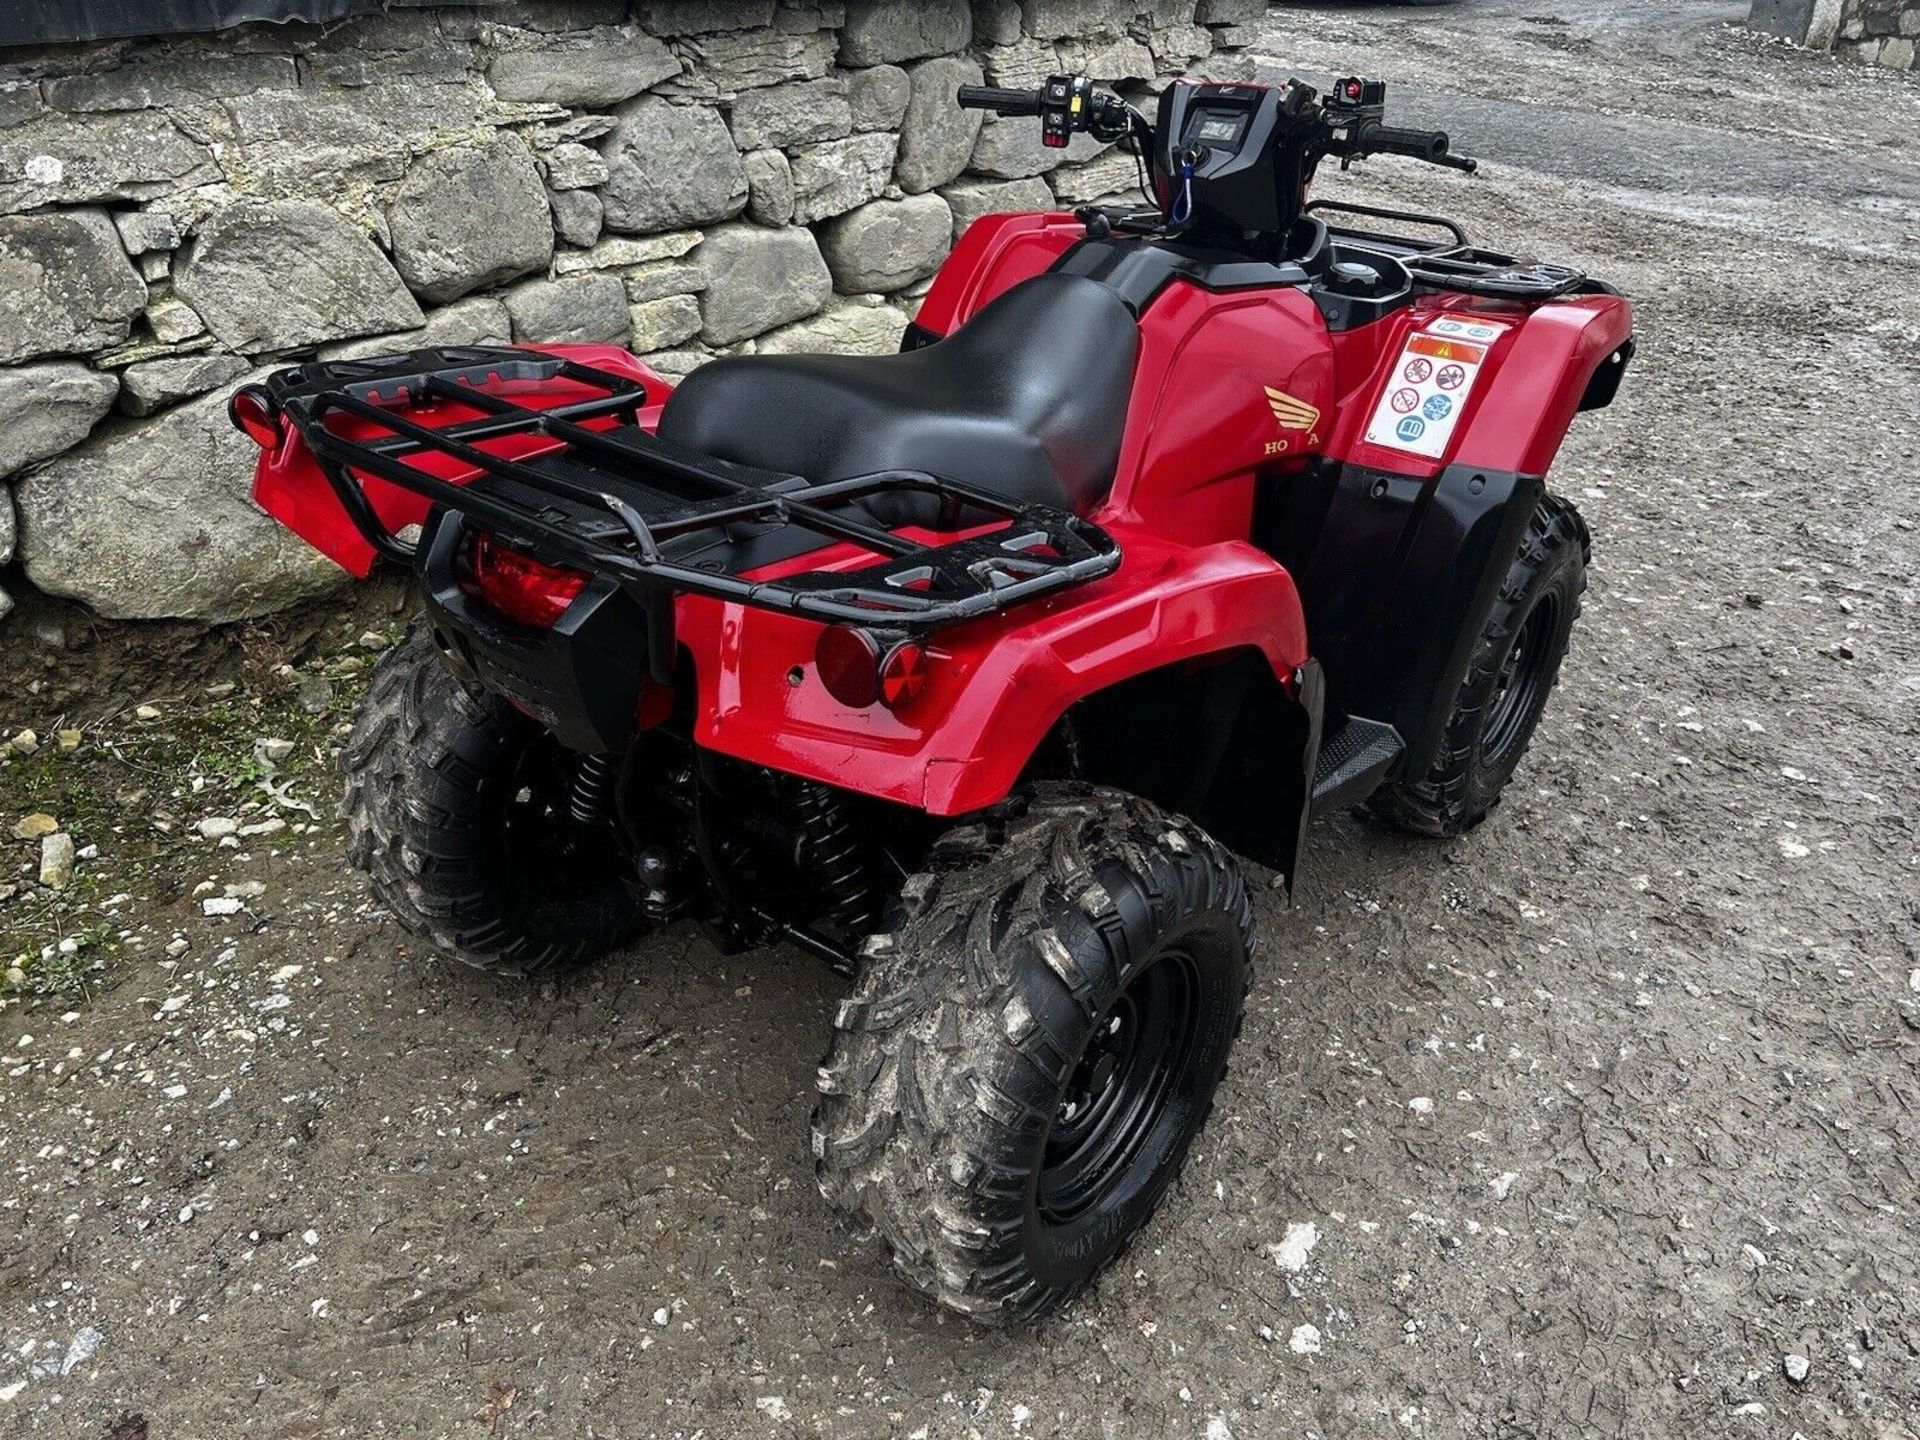 EPS PIONEER: HONDA TRX 500 FE QUAD WITH ELECTRIC POWER STEERING - Image 8 of 8